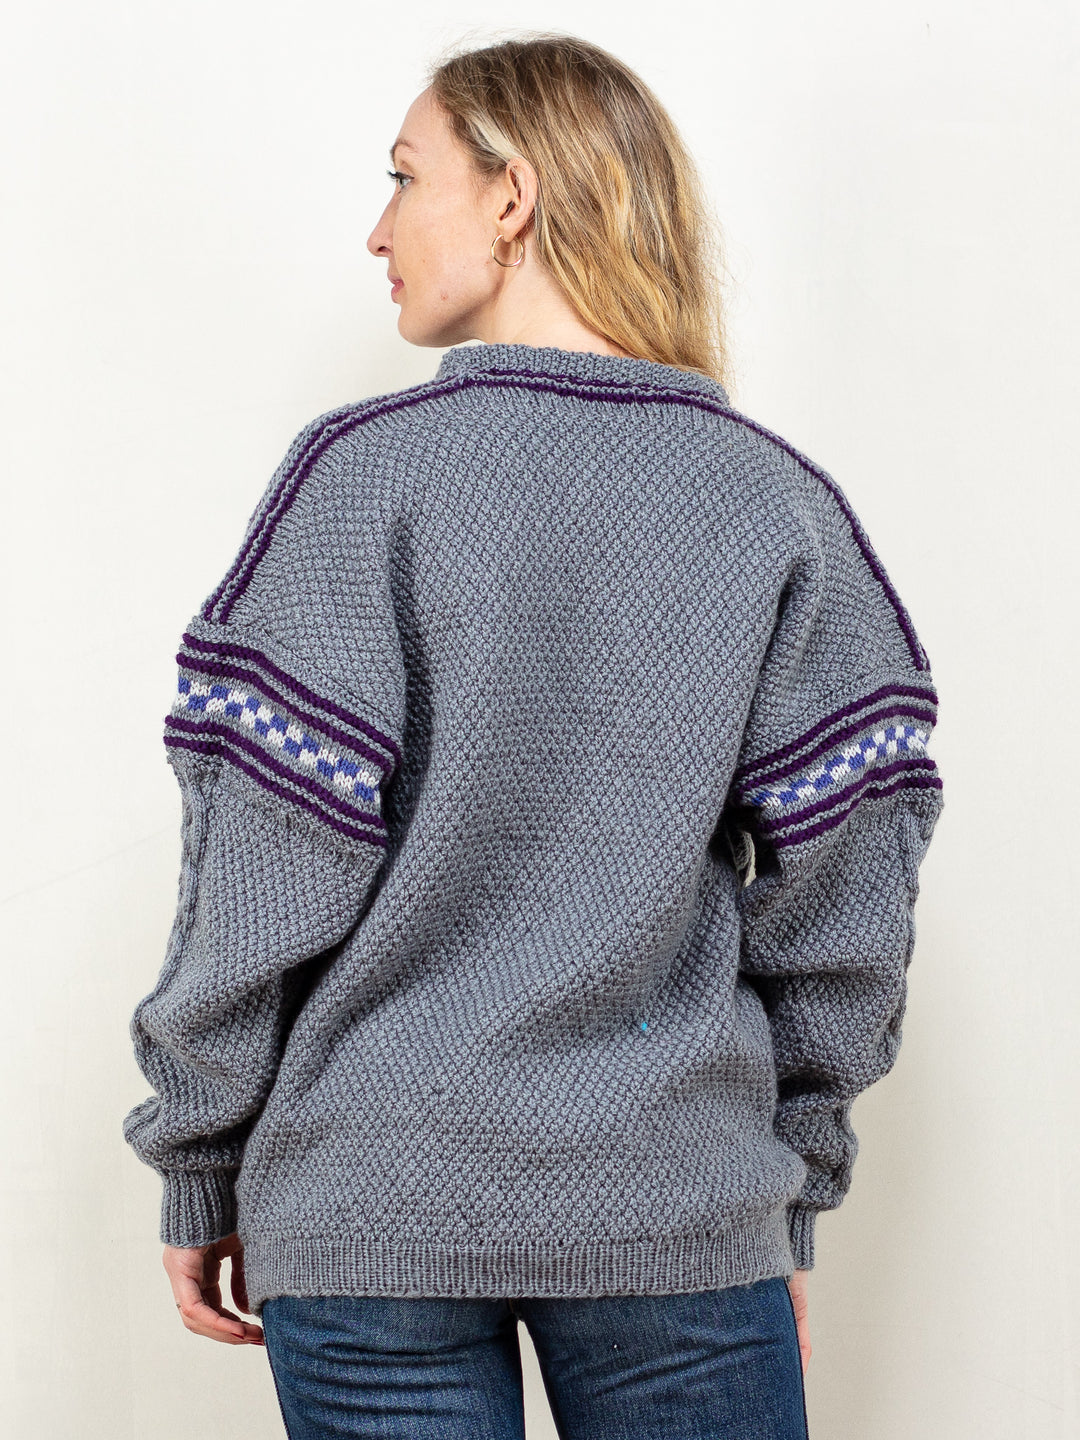 Hand Knit Sweater vintage 90's chunky knit cable knit sweater apres ski grey patterned jumper winter pullover women sustainable size medium